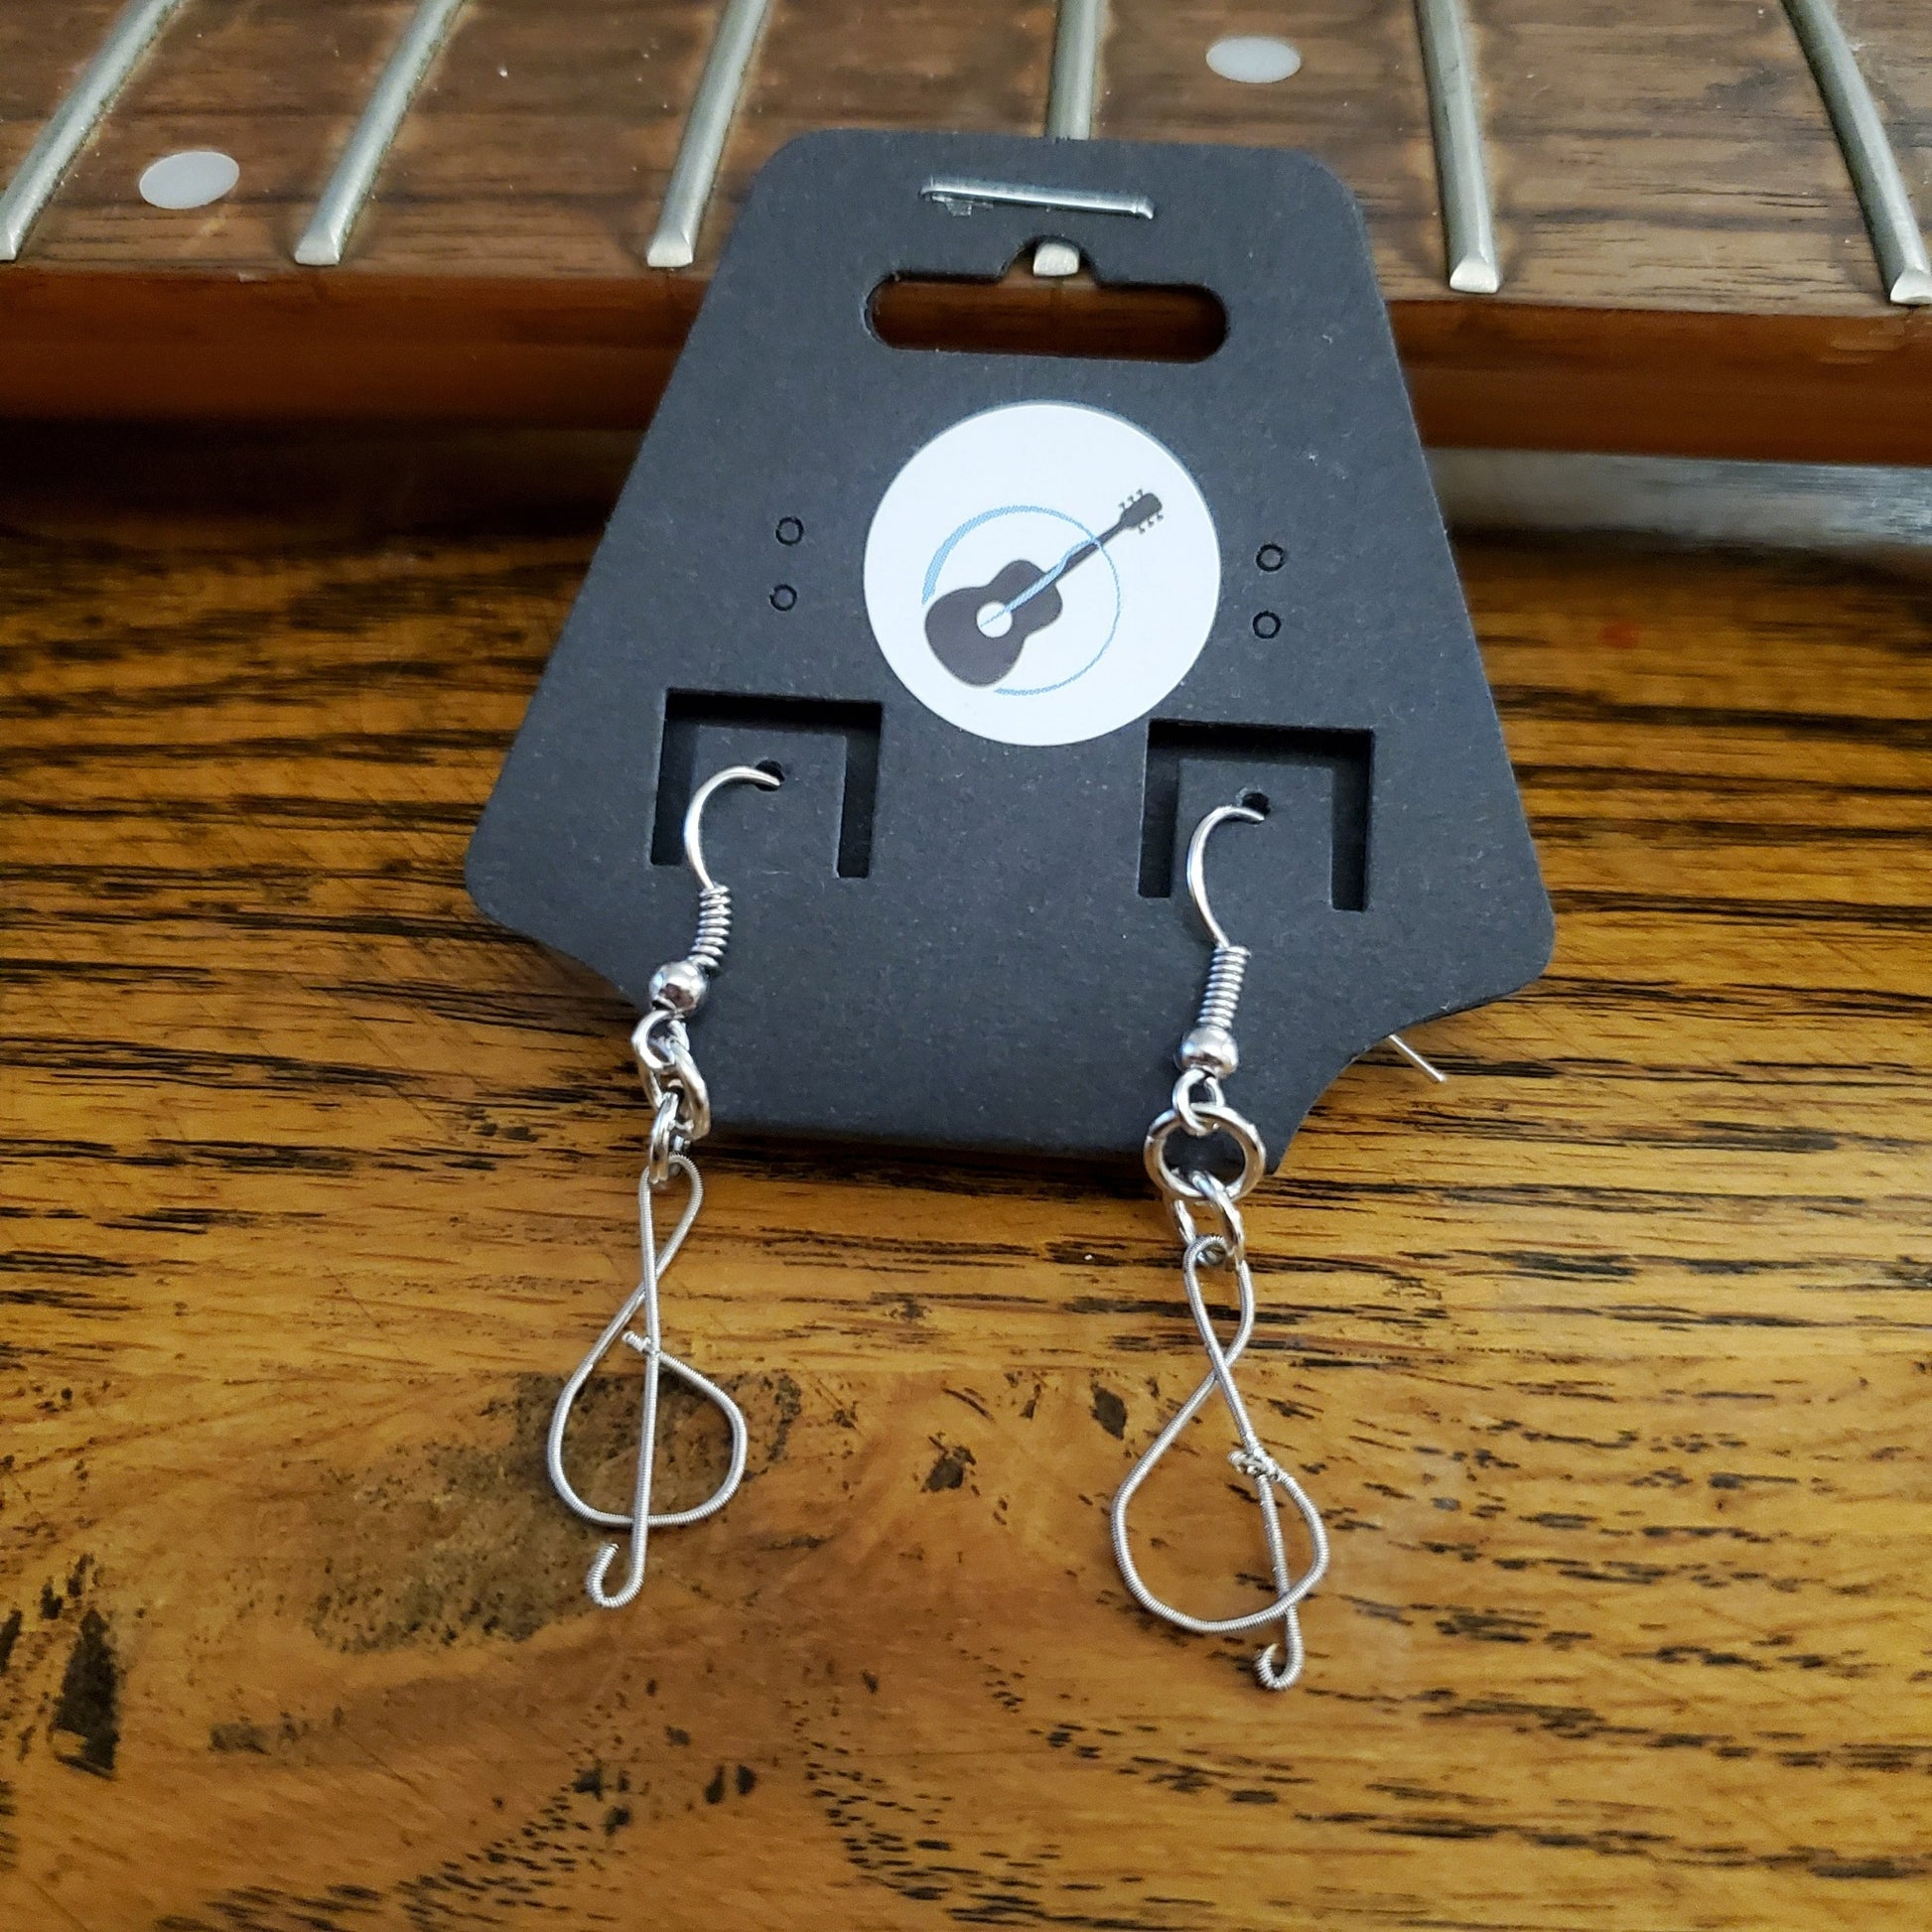 pair of earrings in the shape of treble clefs, made from upcycled guitar strings, hanging from a black earring card lying on the neck of a guitar which as no strings